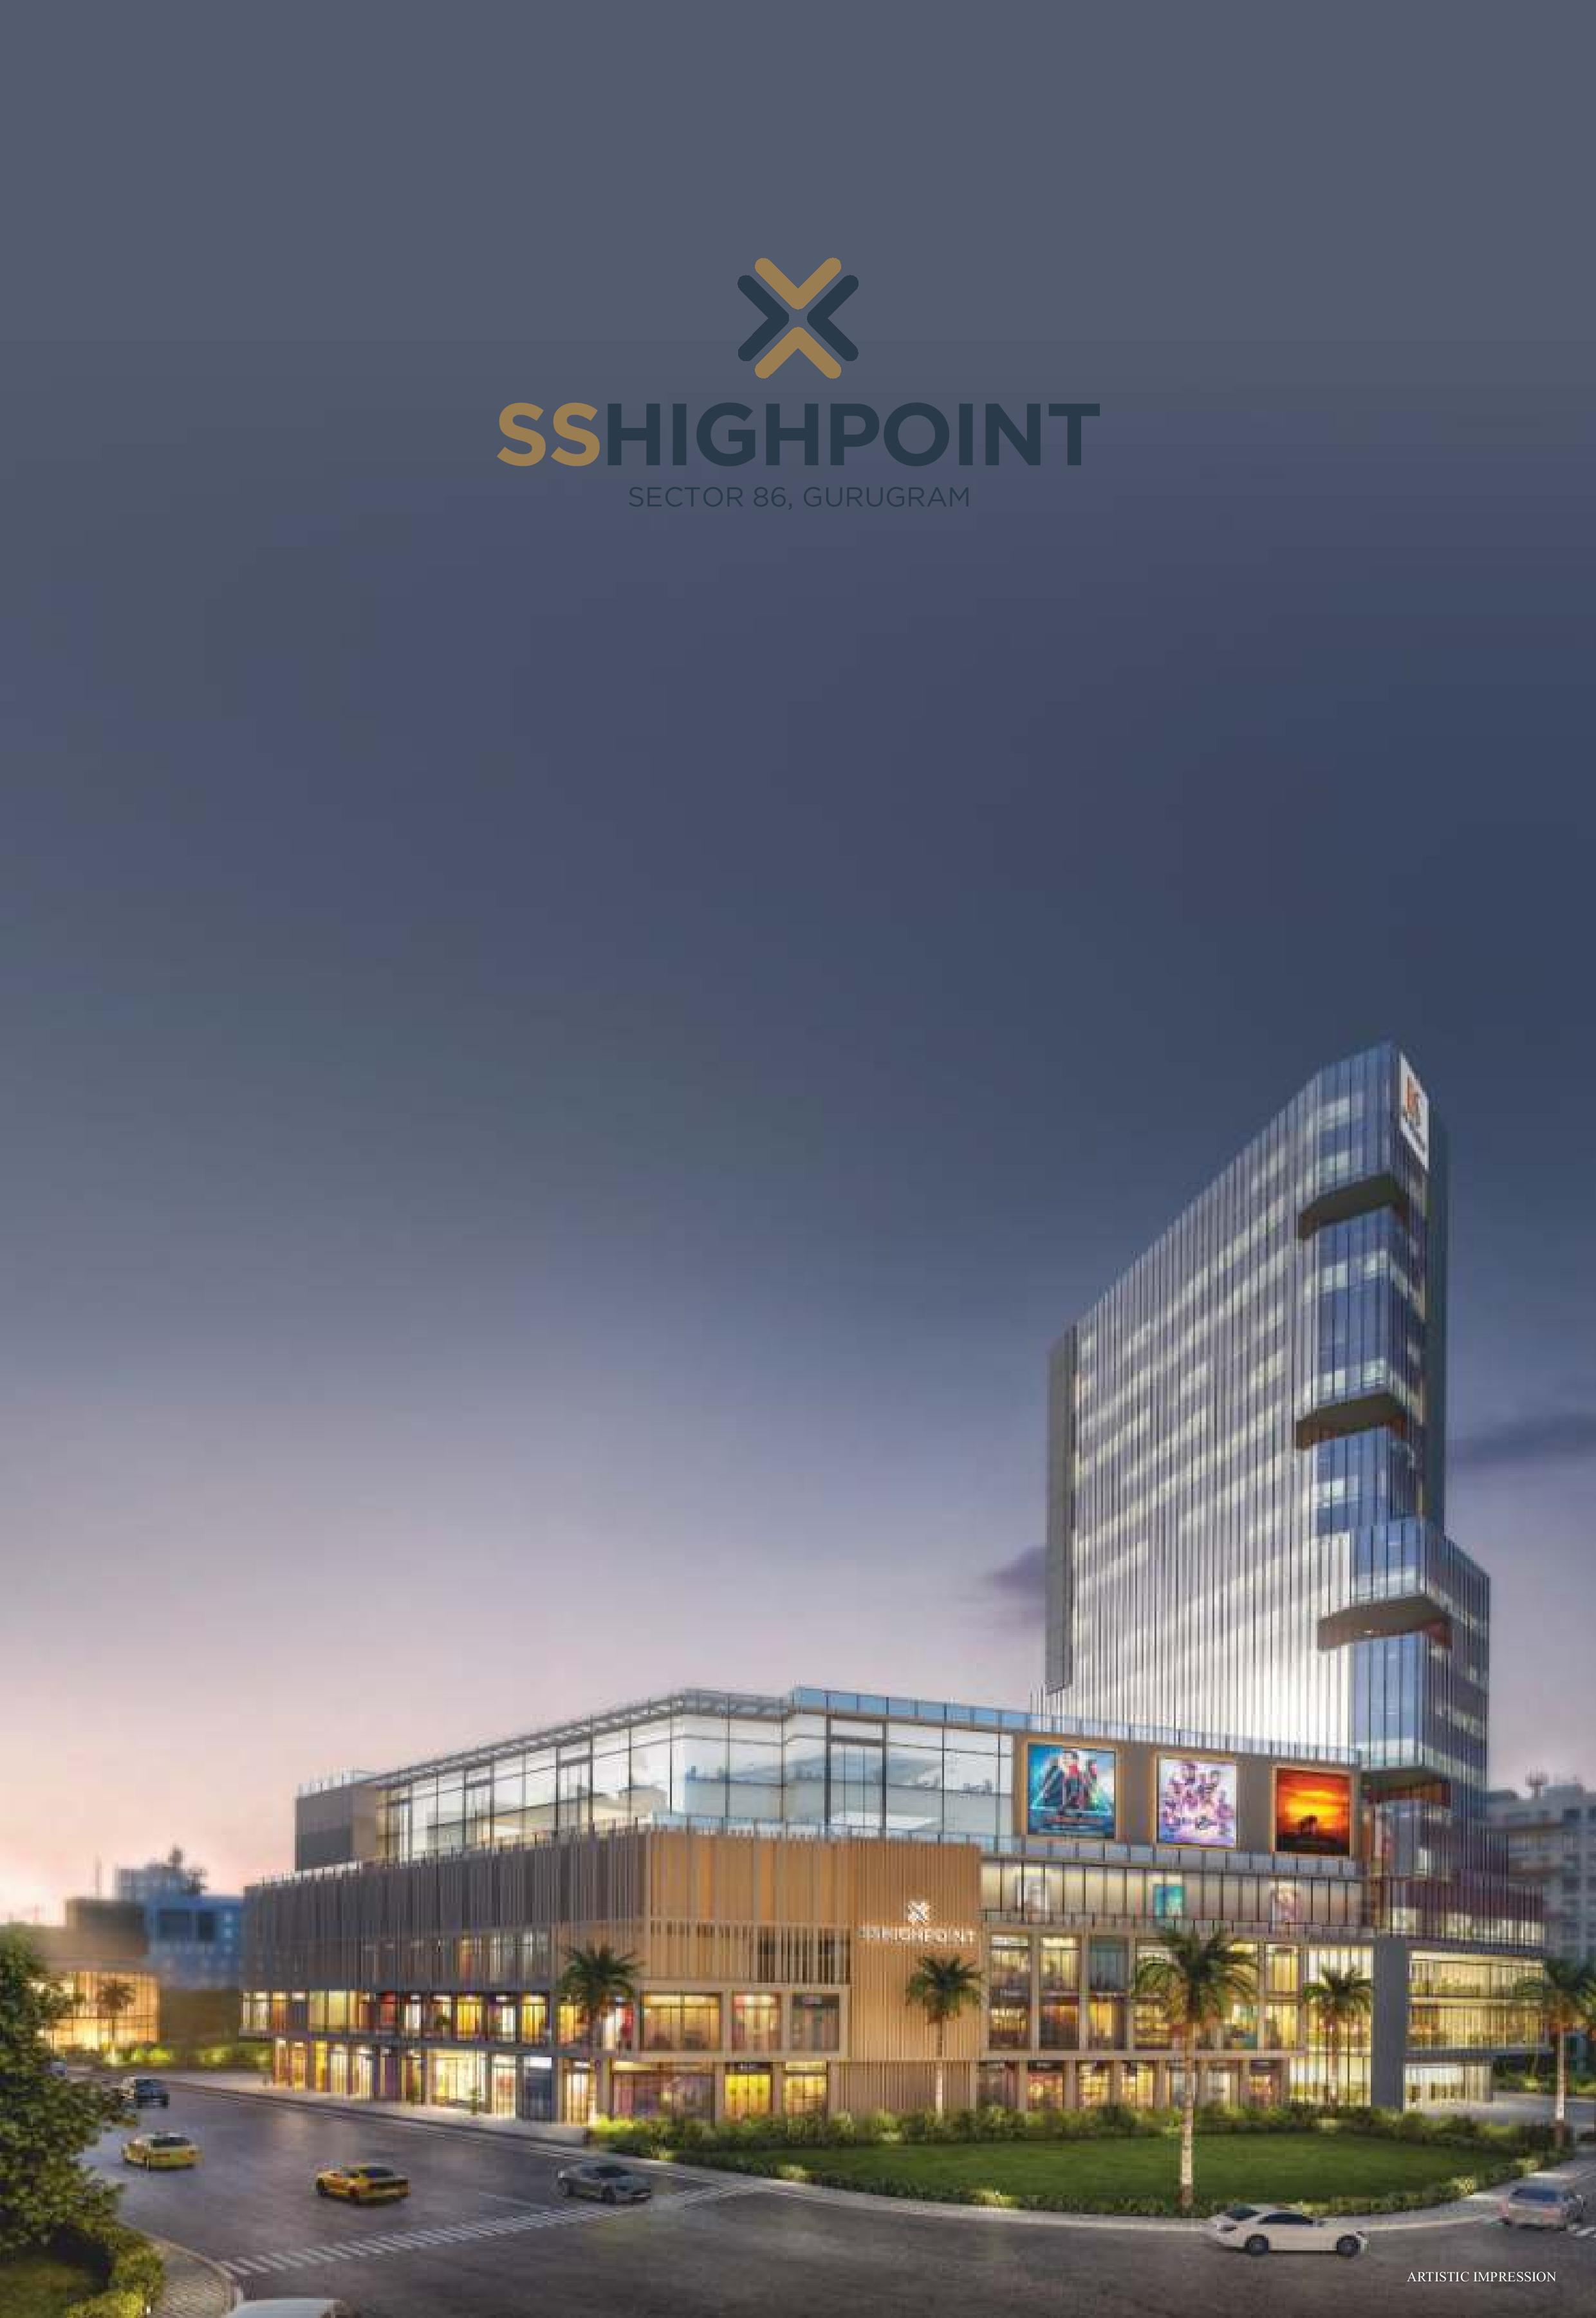 SS Highpoint Image